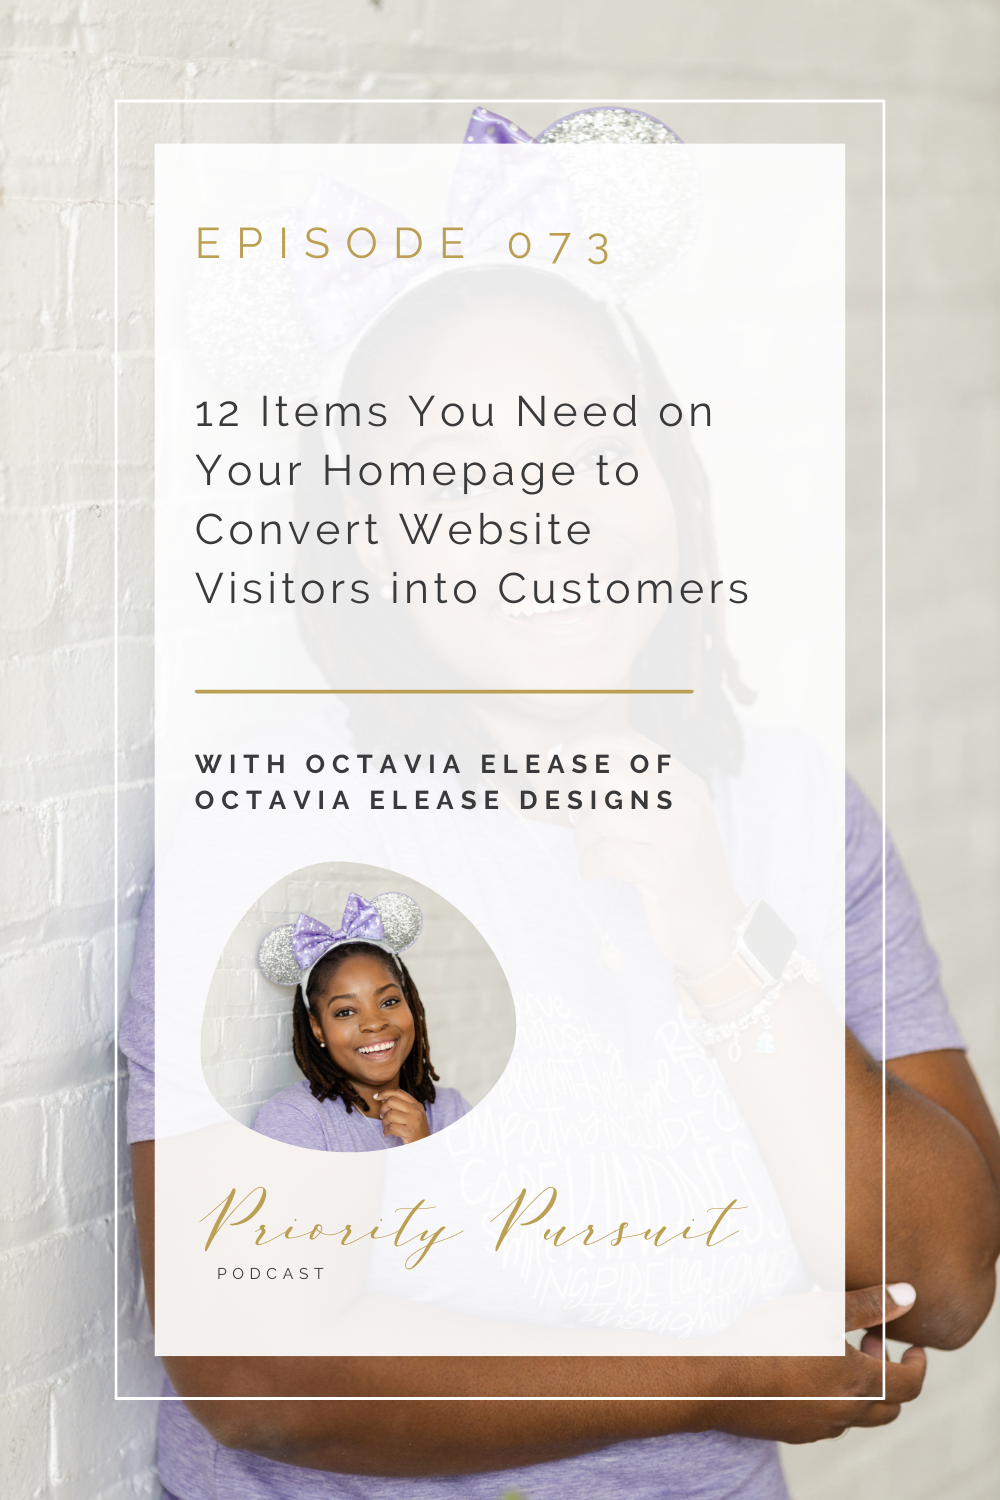 Victoria Rayburn and Octavia Elease discuss items that you need on your homepage to convert website visitors into customers.